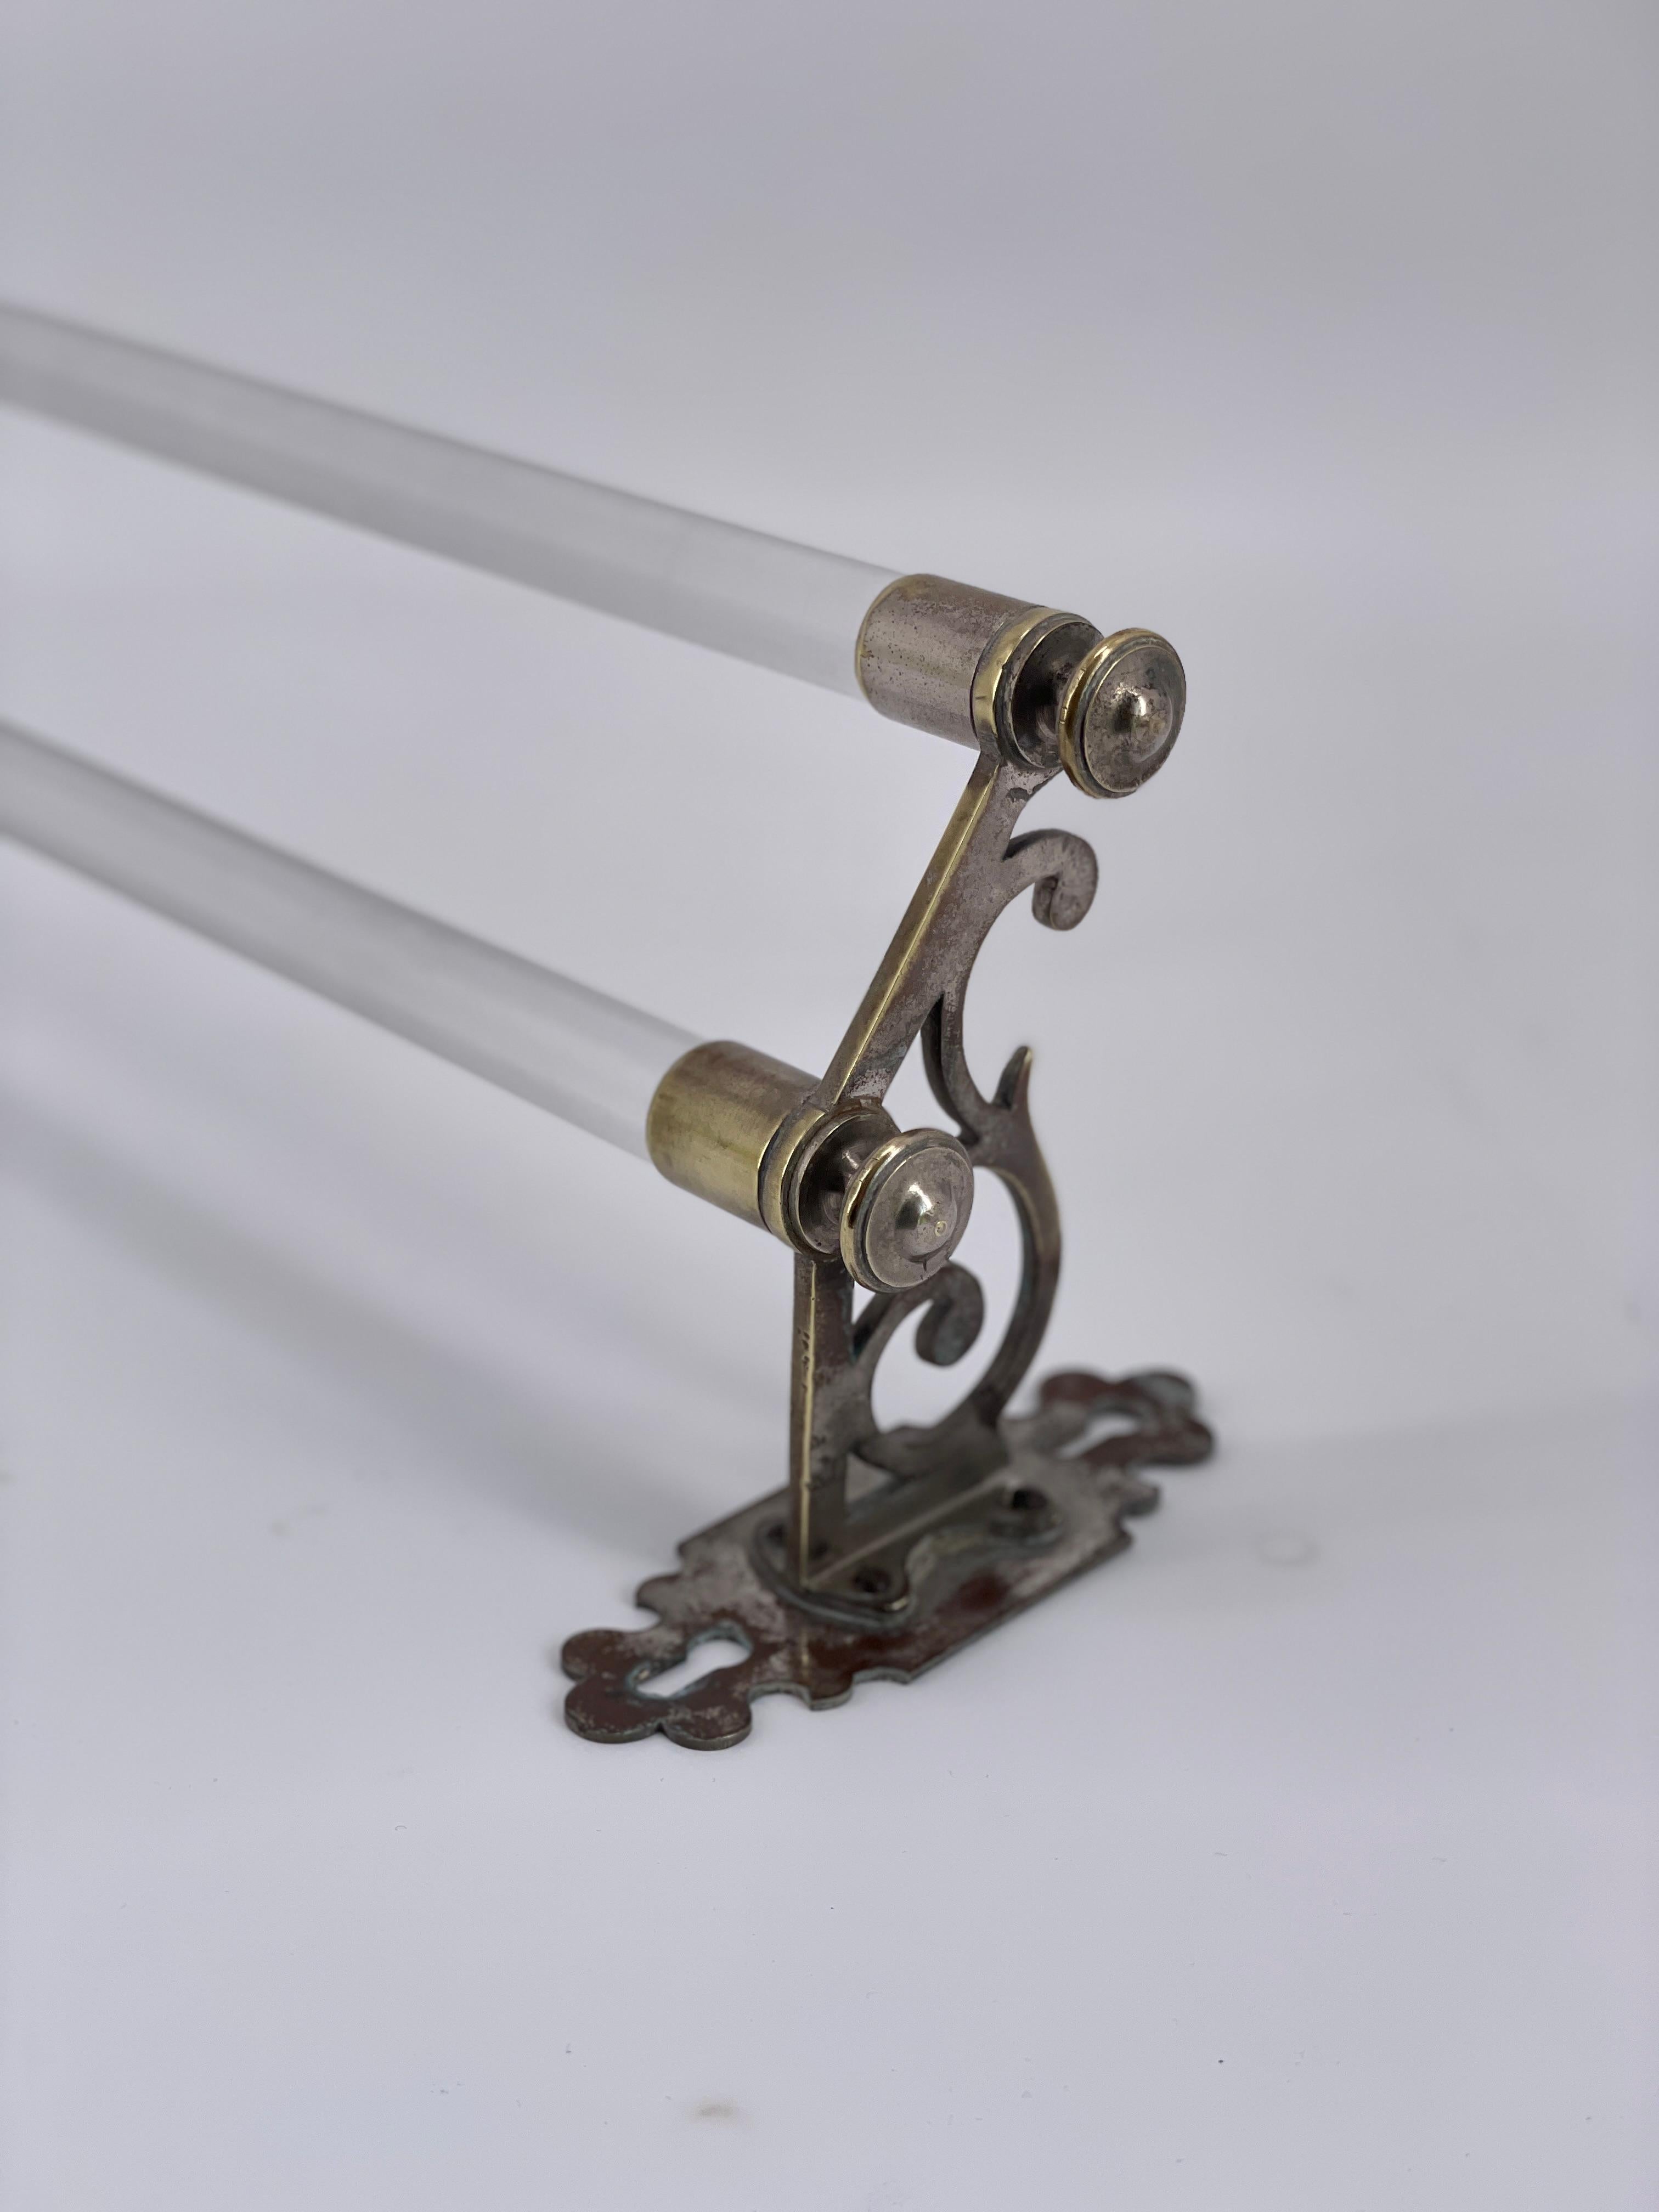 Early XXth century french double towel rail nickel plated brass and clear glass rails.
Double towel rail circa 1900 with two clear glass rails and a delicate nickelled brass mount.
A refined and delicate french model bringing personality and charm